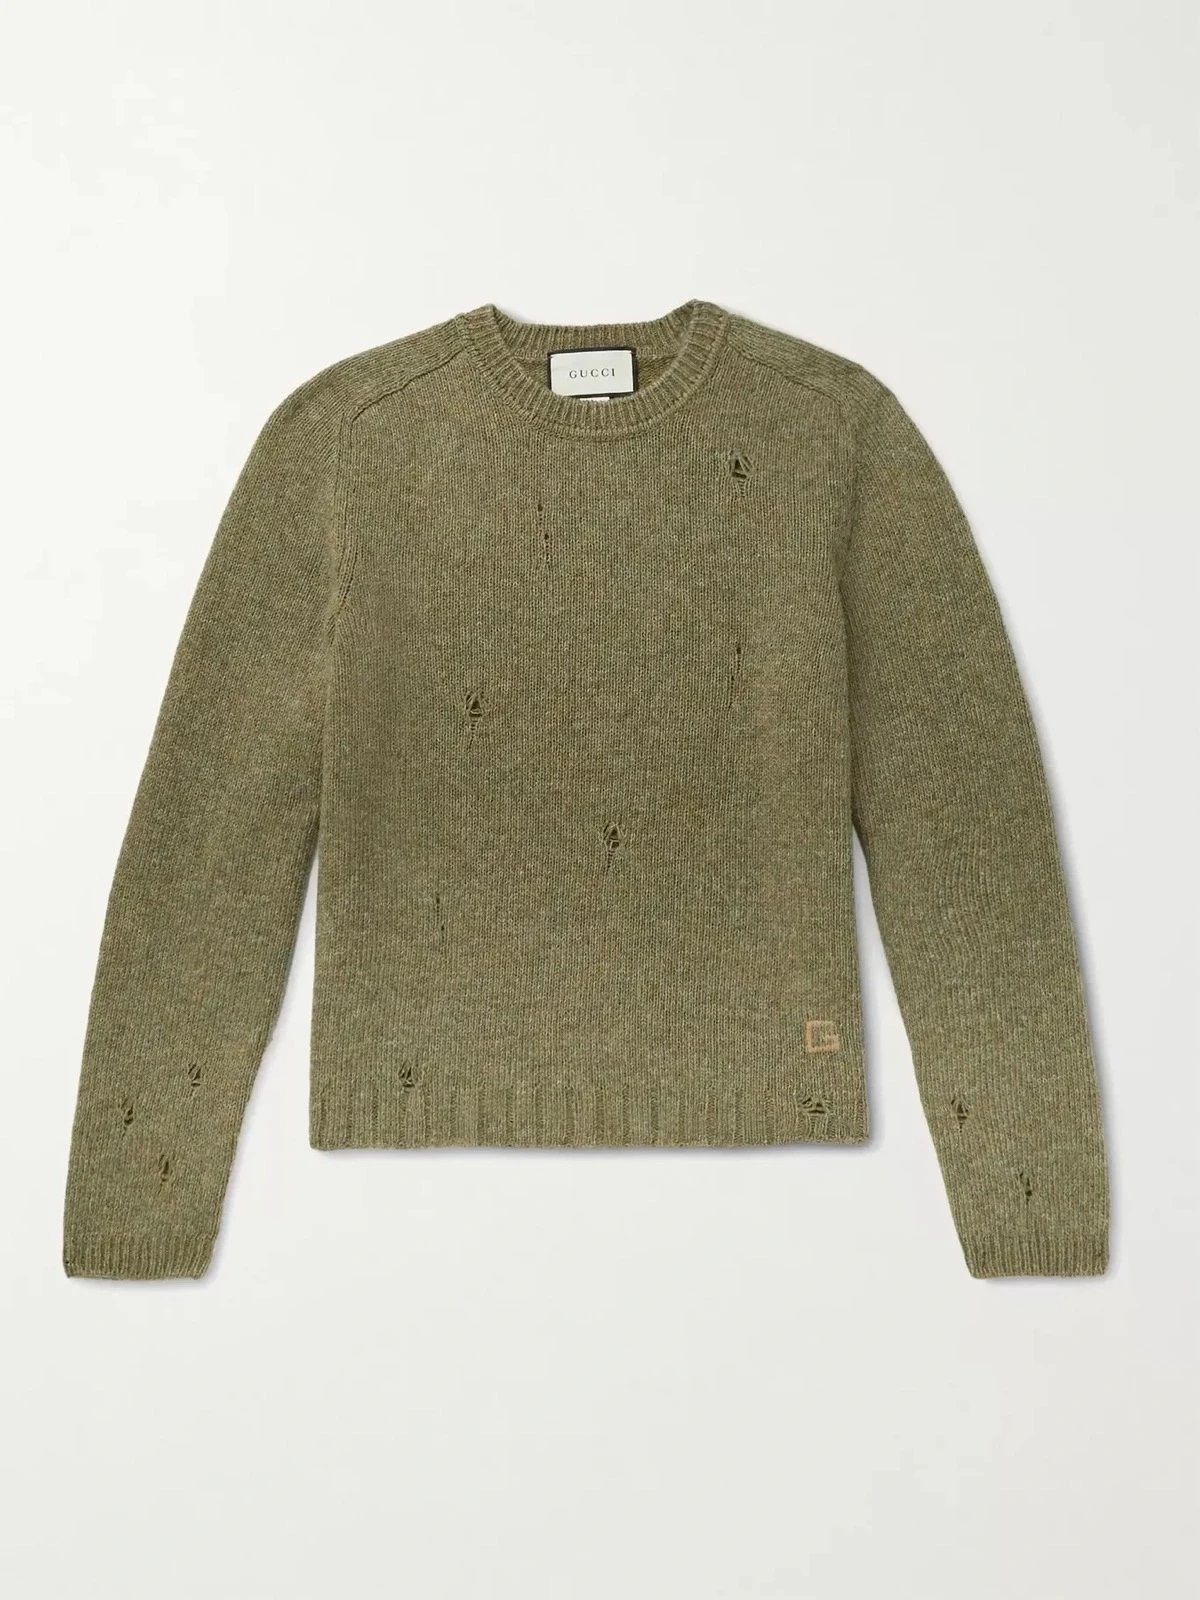 Pre-owned Gucci Distressed Sweater - Green Shetland Wool